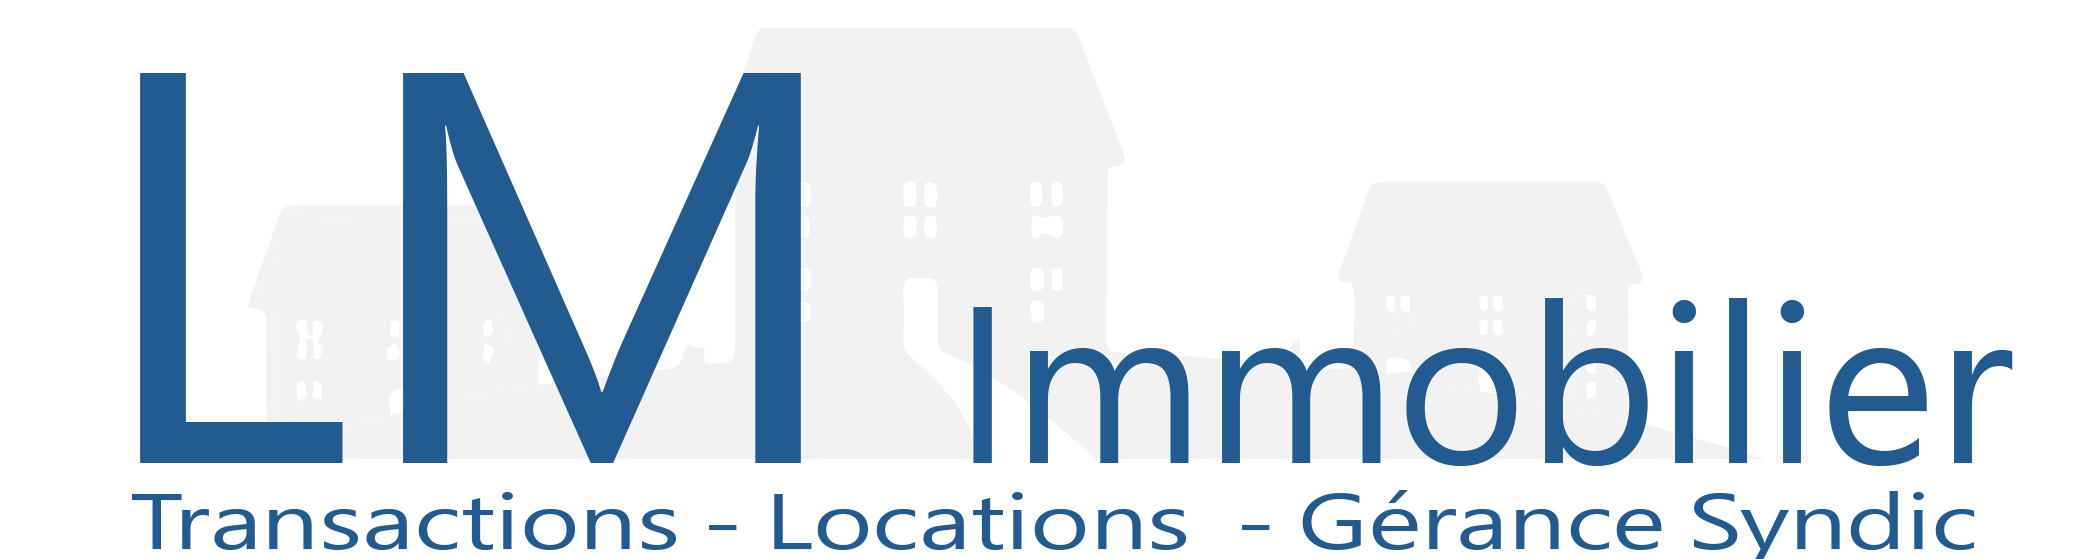 LM Immobilier Logo